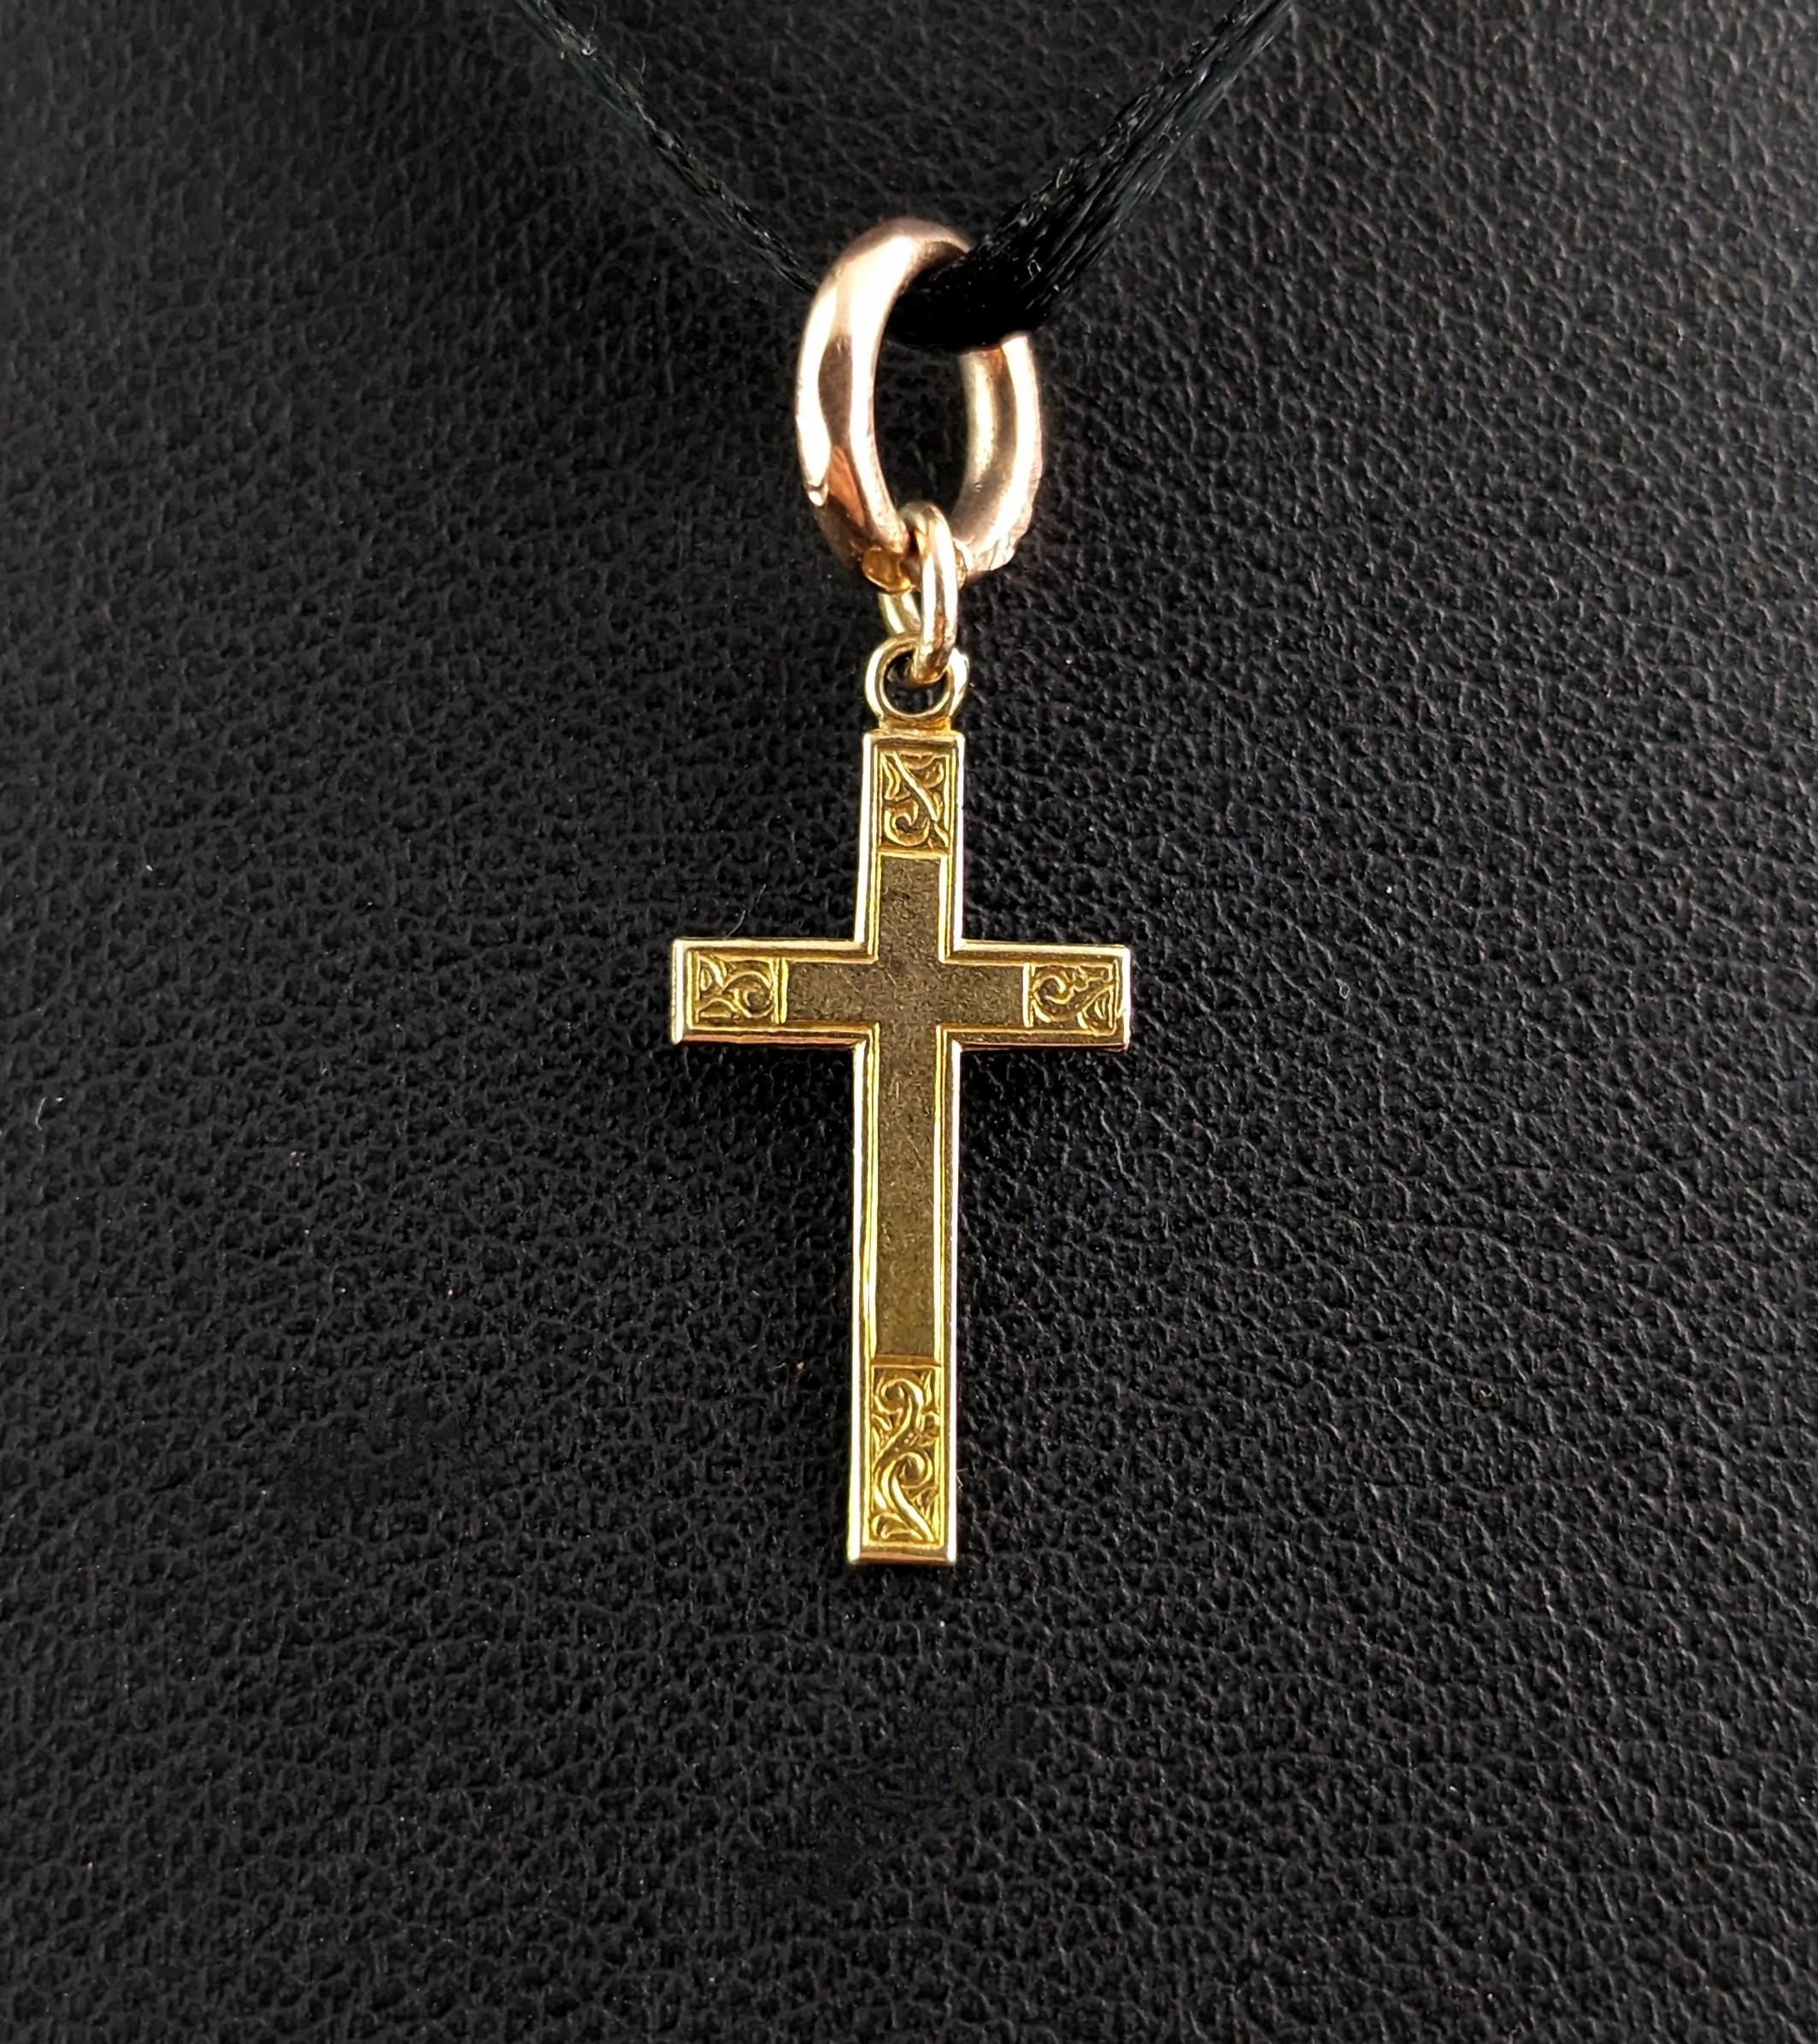 The sweetest tiny little 9ct gold cross pendant or charm.

It is a small sized piece with a fine line engraved border and detailed engraved corners with an almost Celtic design of swirling flora.

The charm is a mid-century piece and is hallmarked